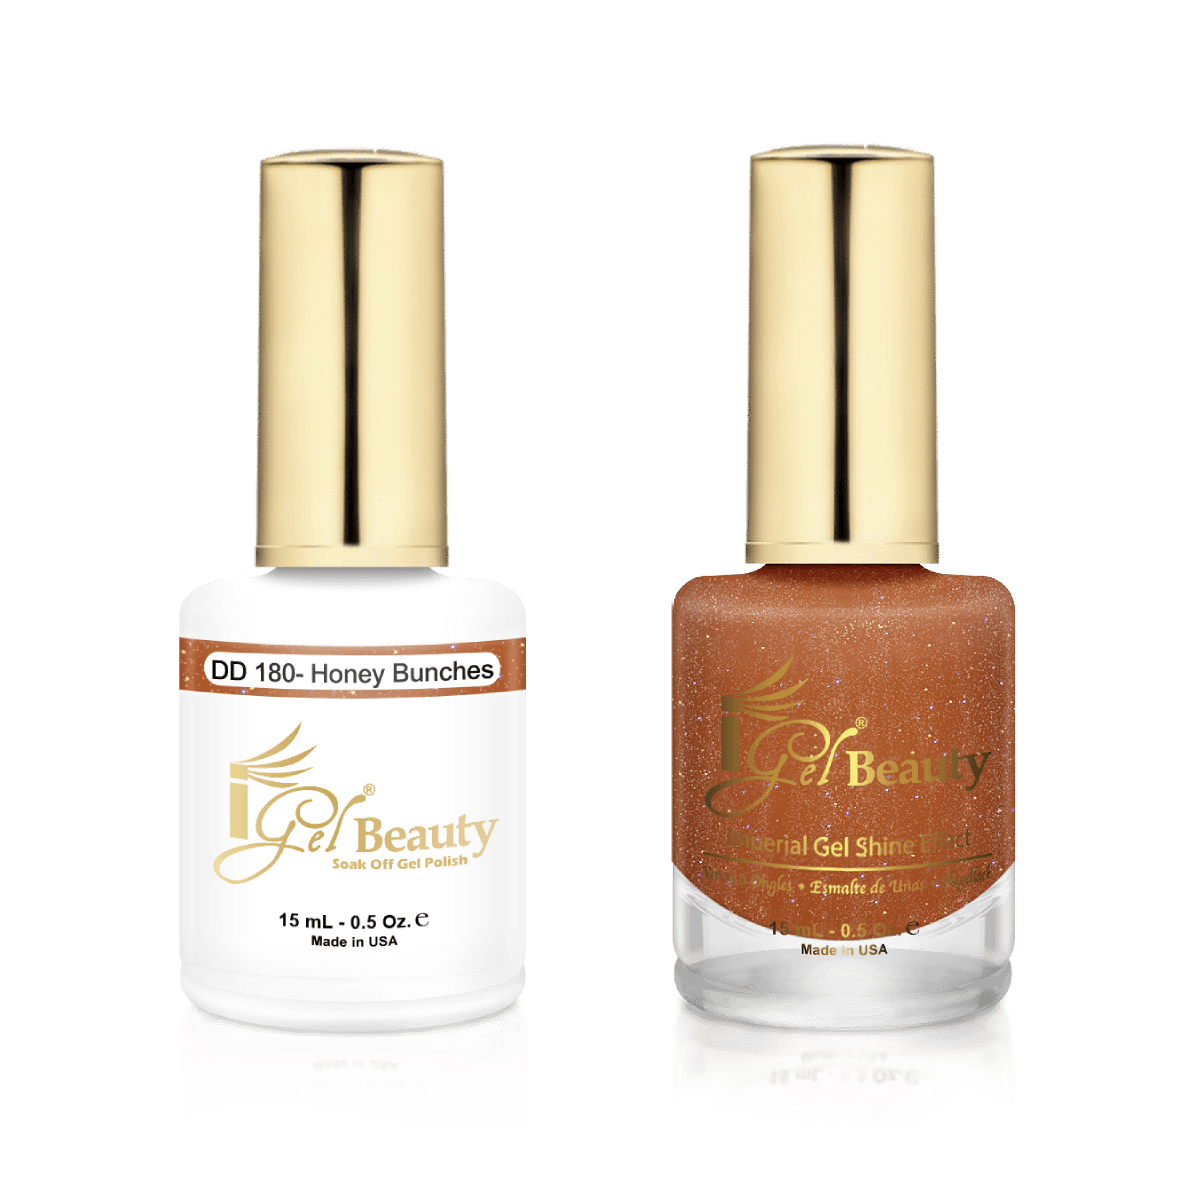 IGel Duo Gel Polish + Matching Nail Lacquer DD 180 HONEY BUNCHES